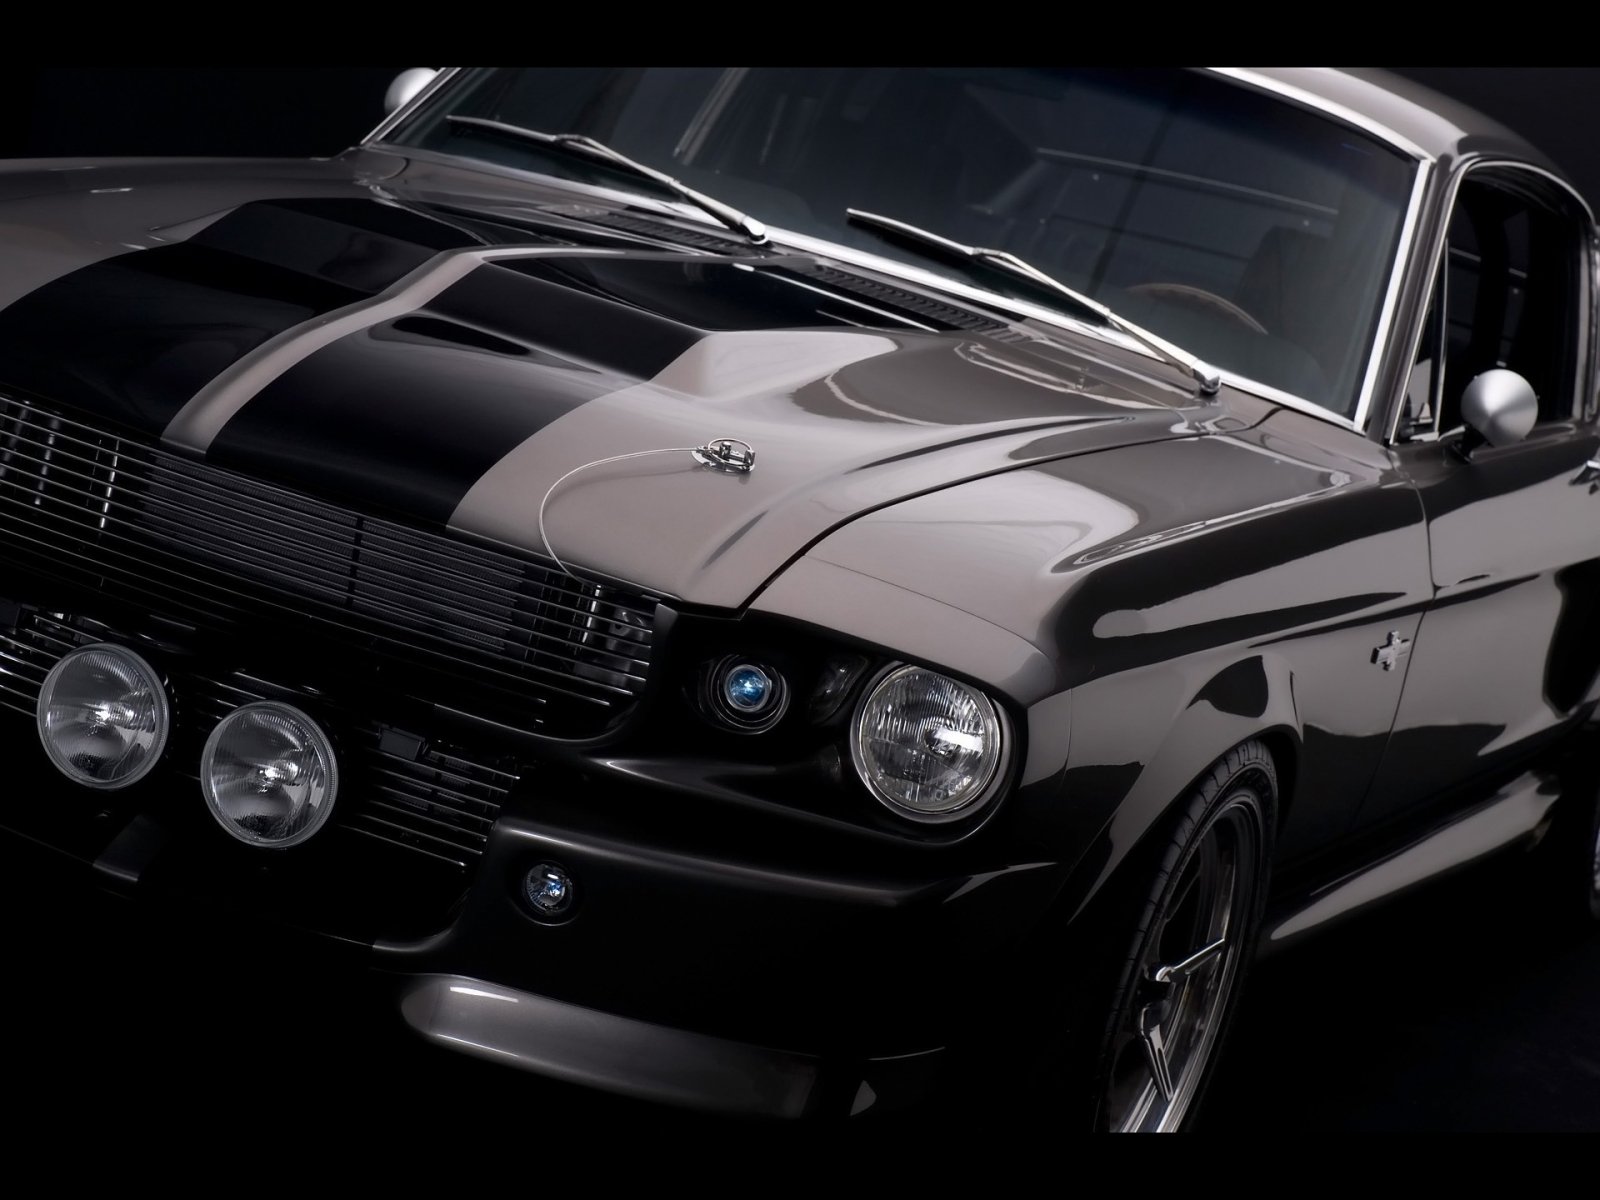 cars, Vehicles, Ford, Mustang Wallpaper